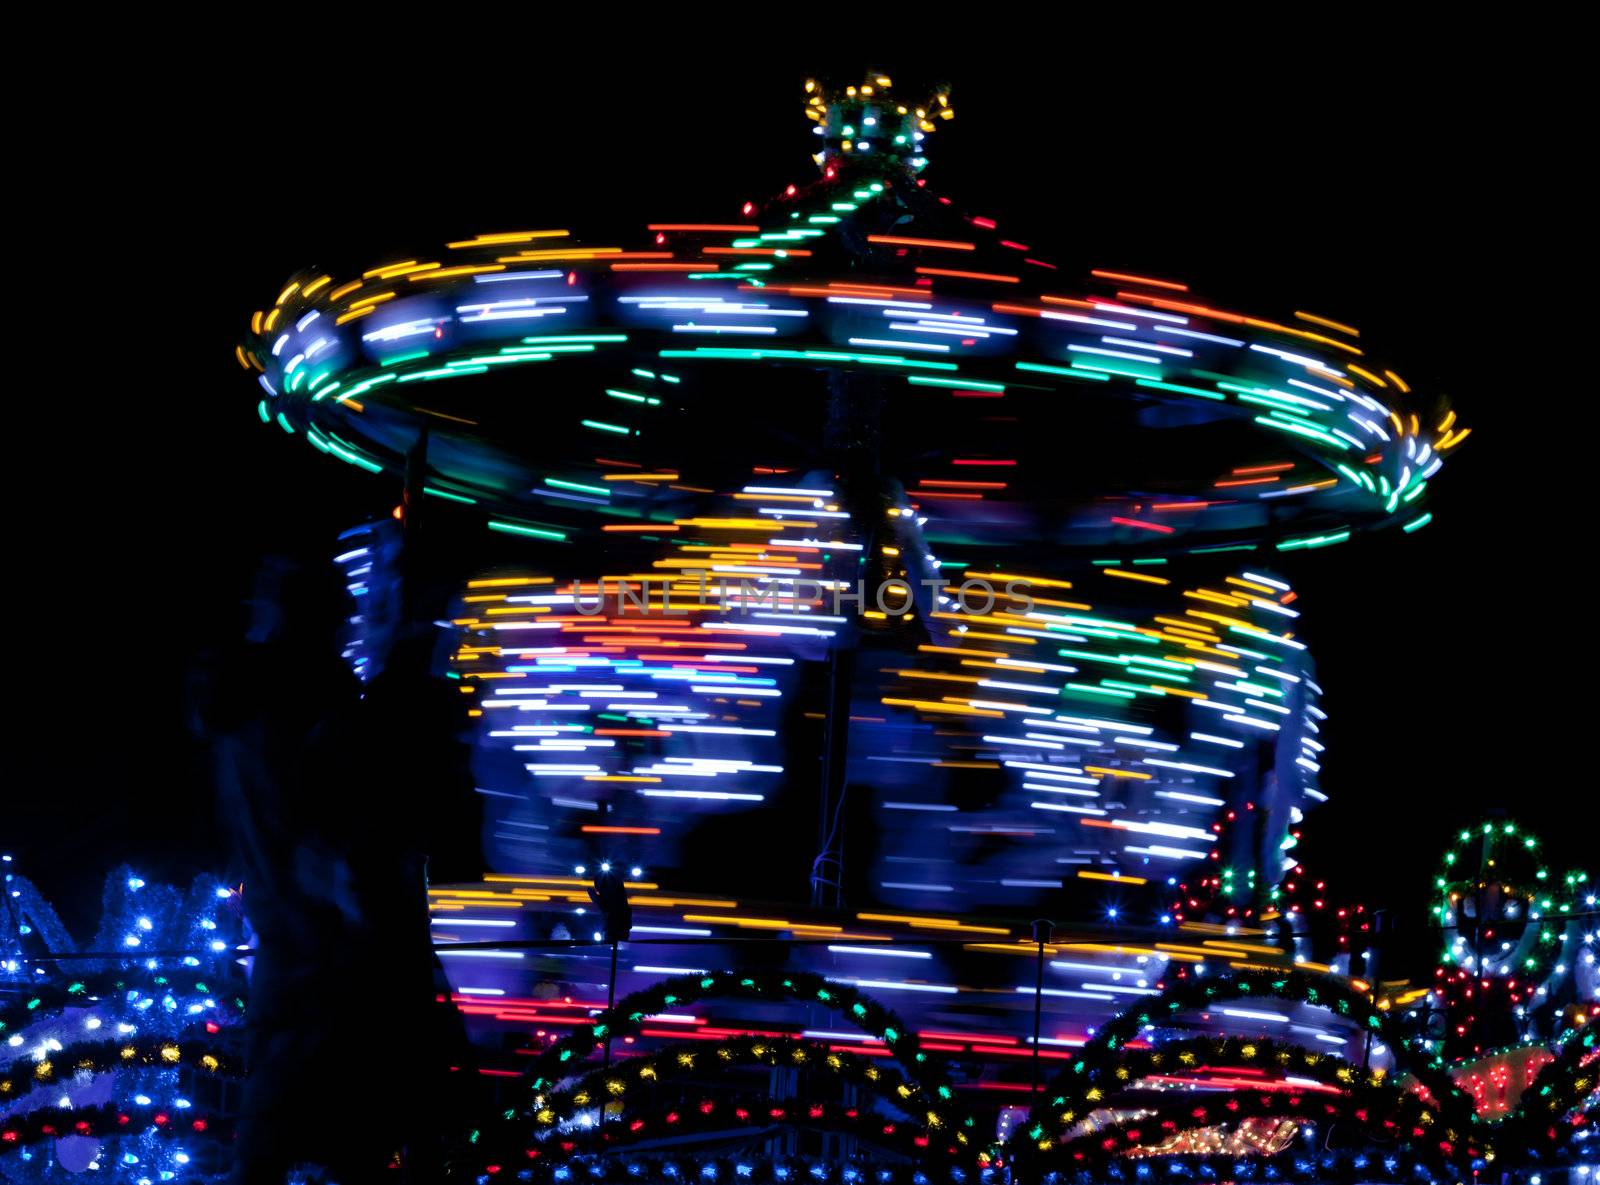 Merry-go-round twisting fast in the night with thousands lights